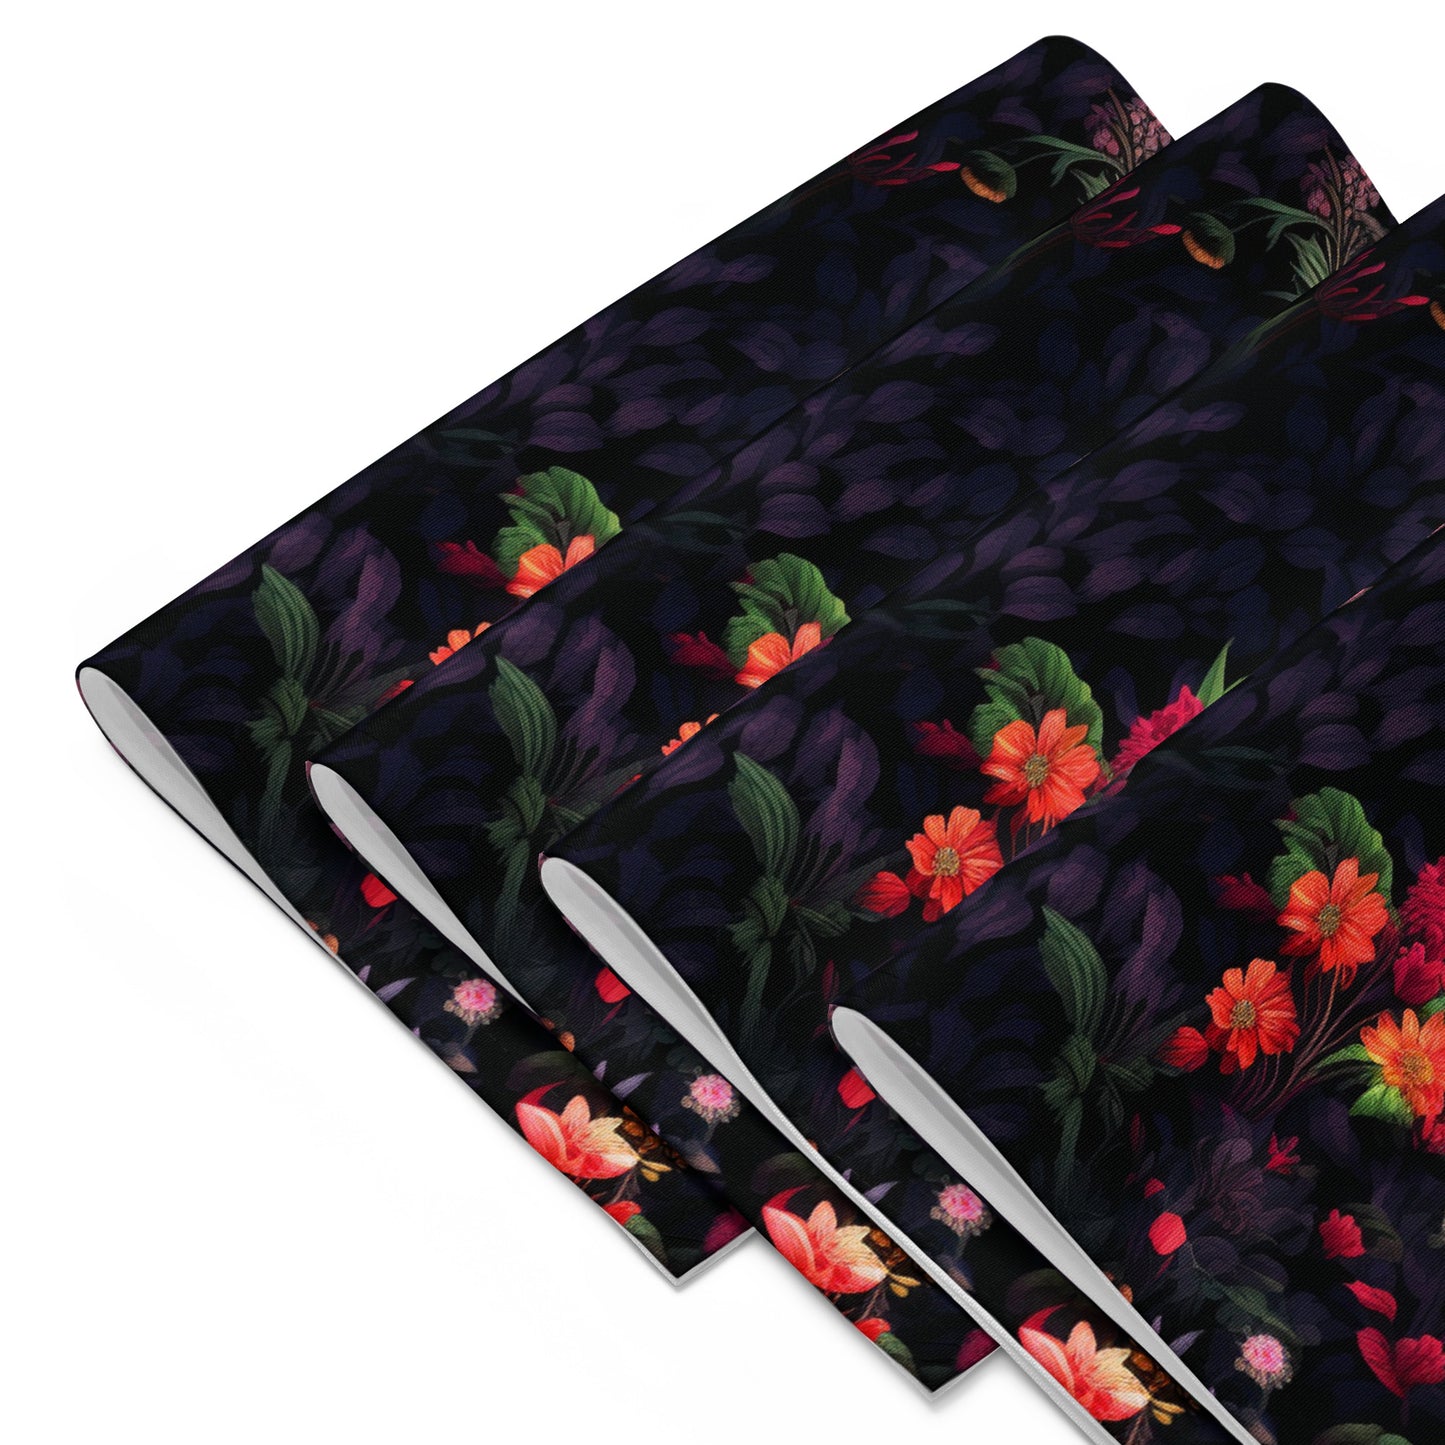 Neduz Designs Artified Floral Print Placemat Set - Elegant, Water-Resistant Dining Accessory